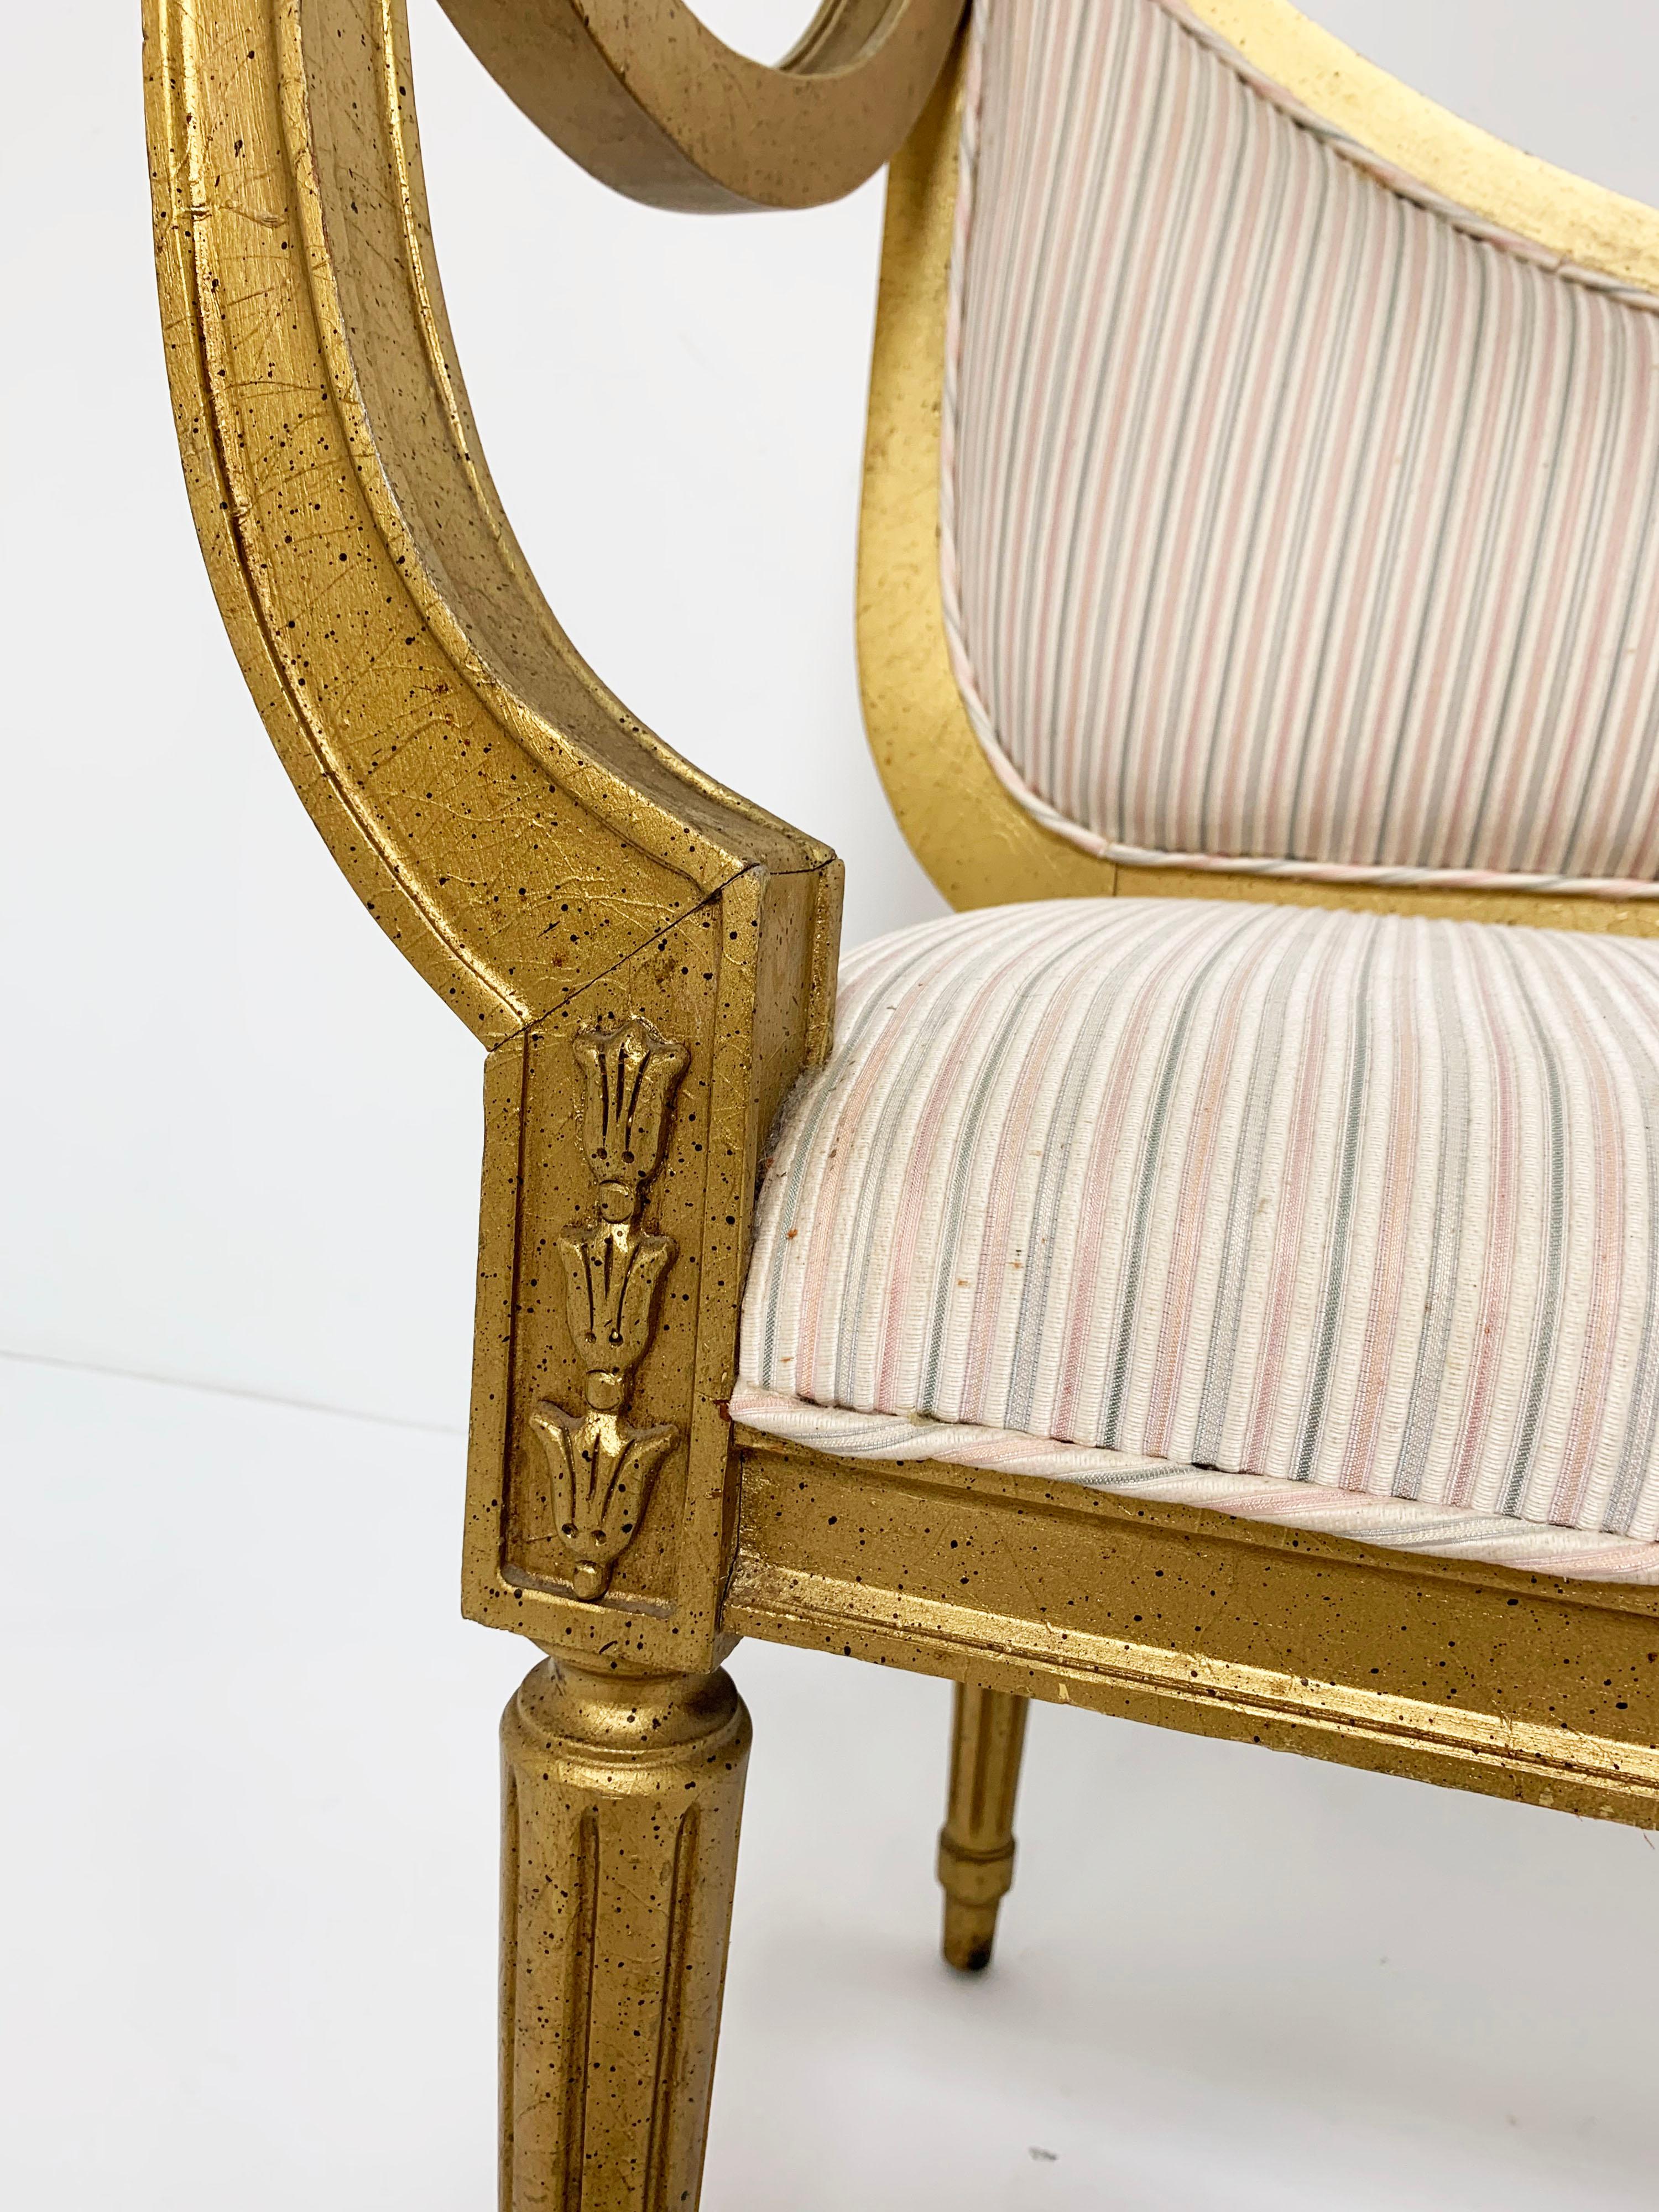 Italian Midcentury Giltwood Settee Bench in the Neoclassical Style, circa 1960s